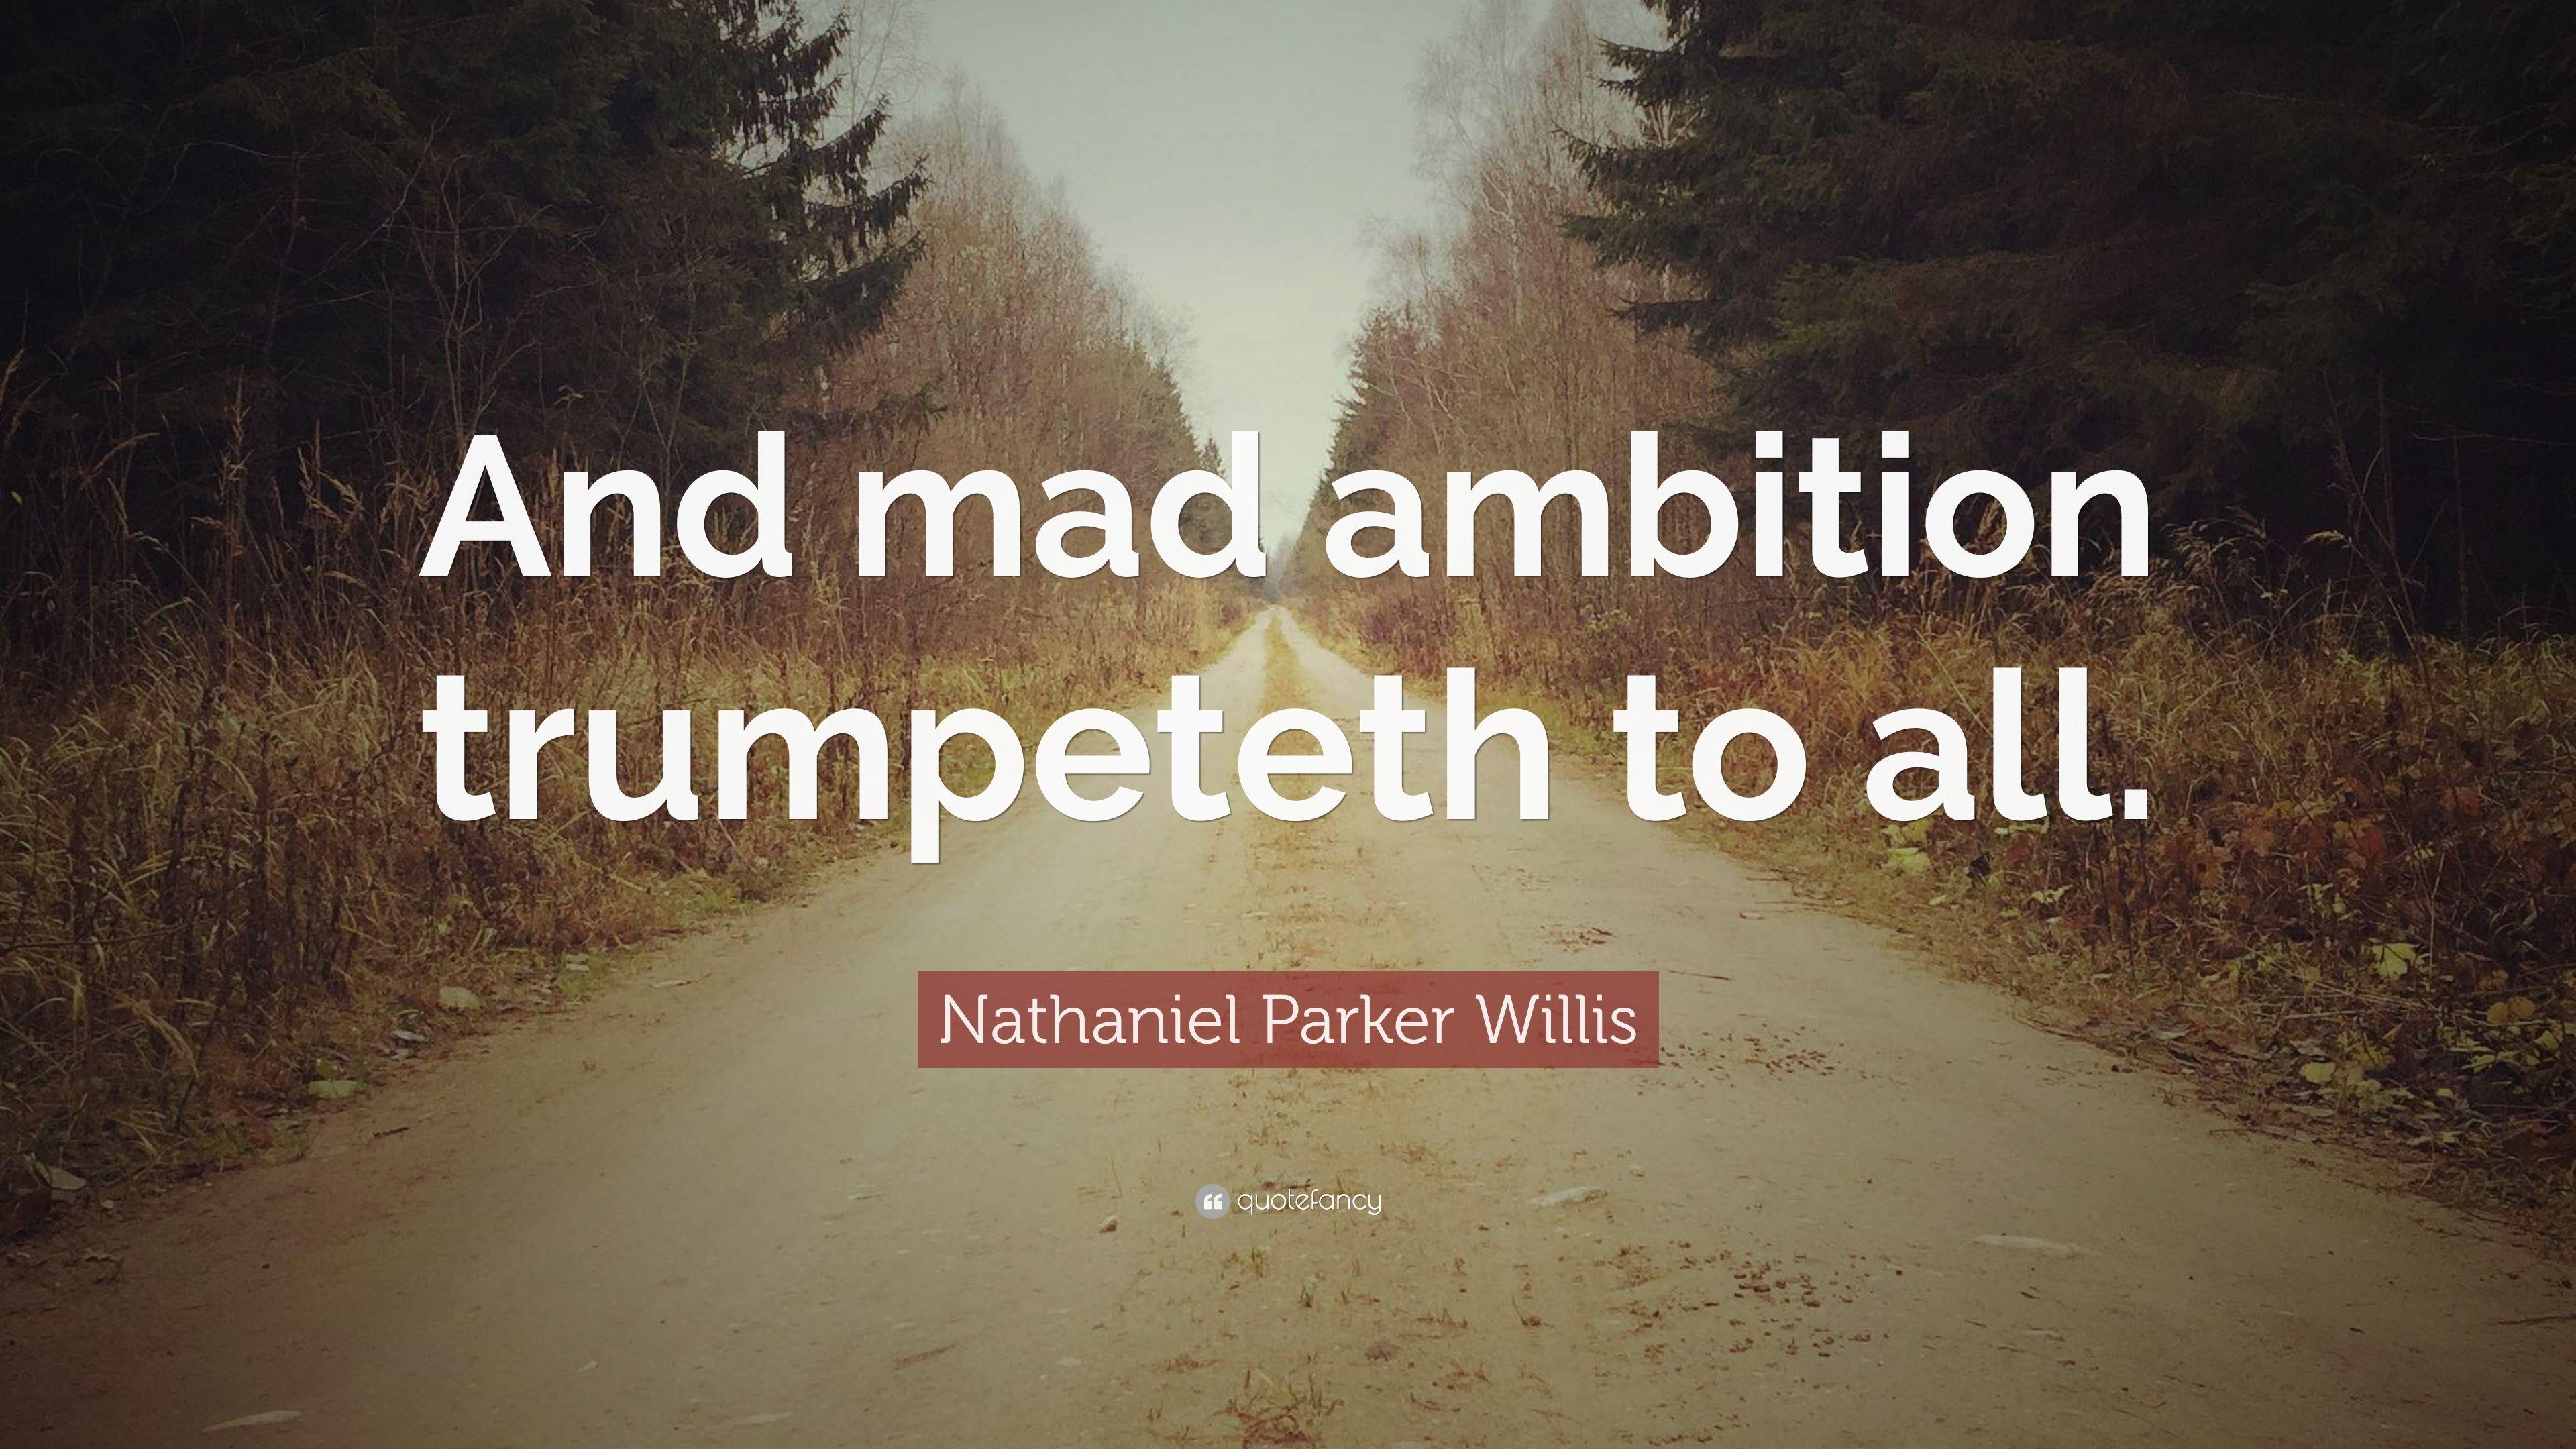 Nathaniel Parker Willis Quote: “And mad ambition trumpeteth to all